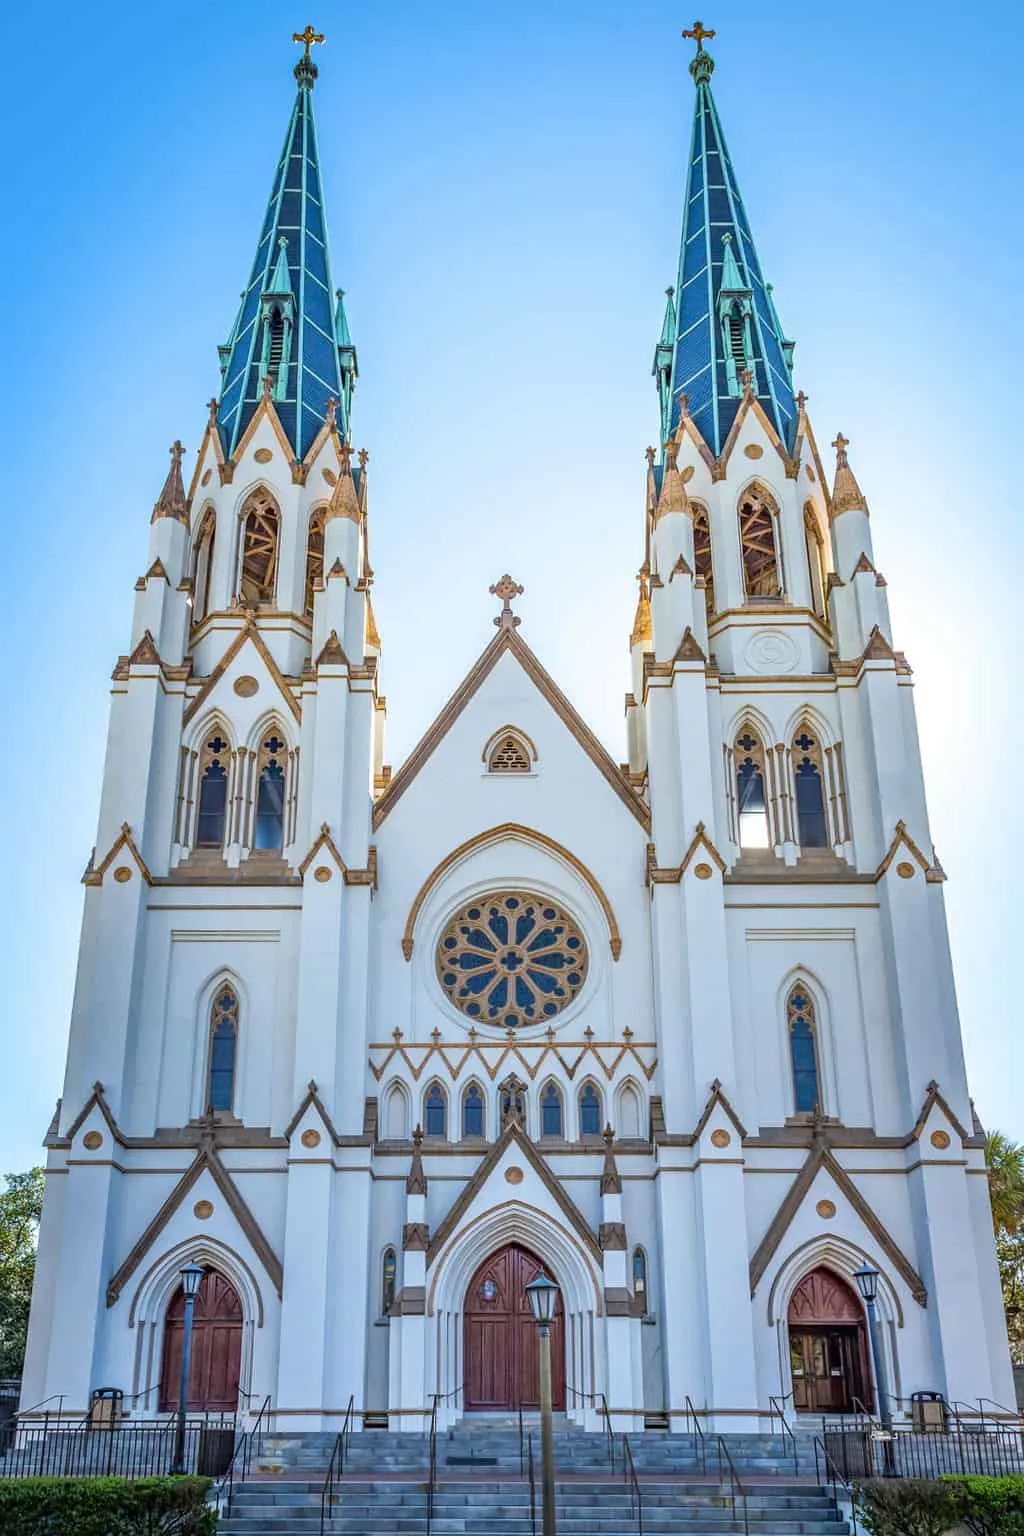 The white, blue and gold exterior of a cathedral with twin spires.